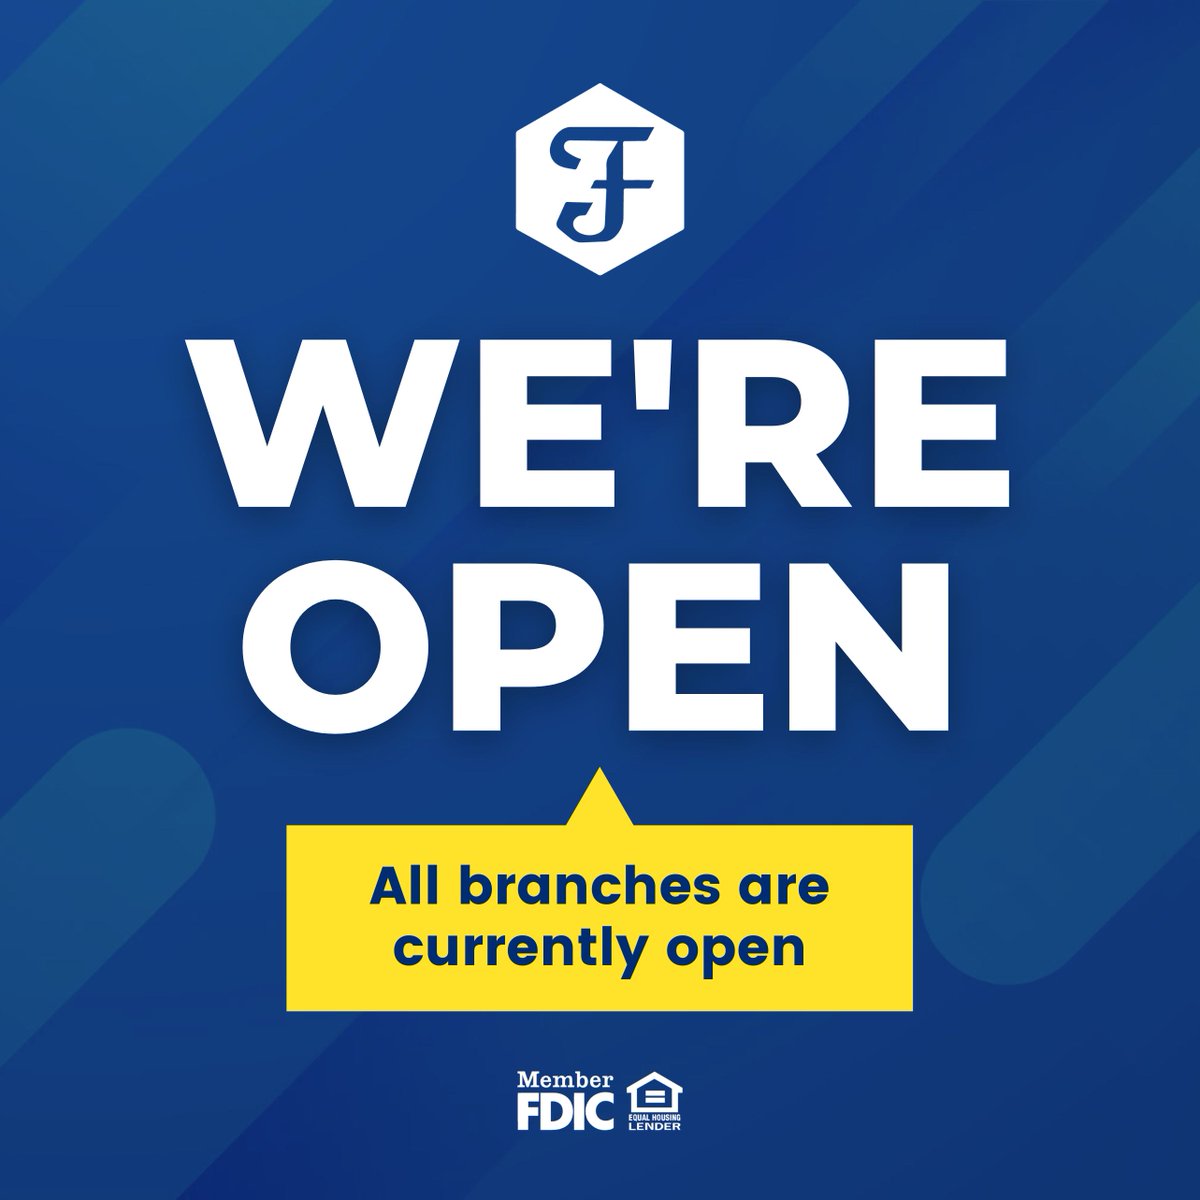 Your safety is our priority, and we're here to serve you whenever you're ready; all our branches are currently open! #HereForGood